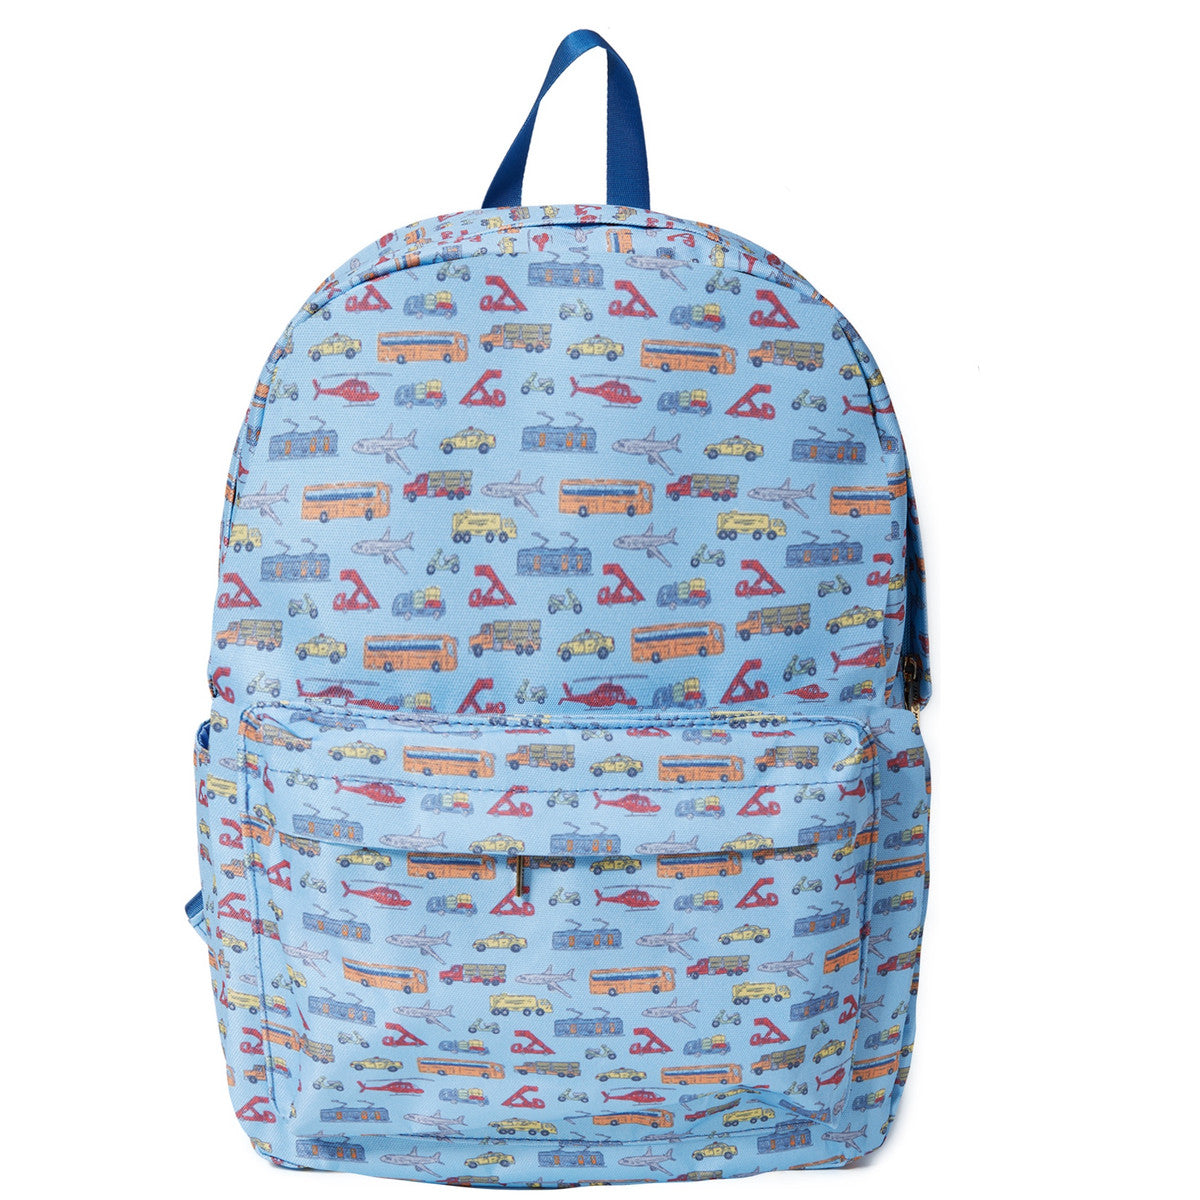 are we there yet kids backpack is blue with cars, buses, airplane, and trucks all over displayed on a white background